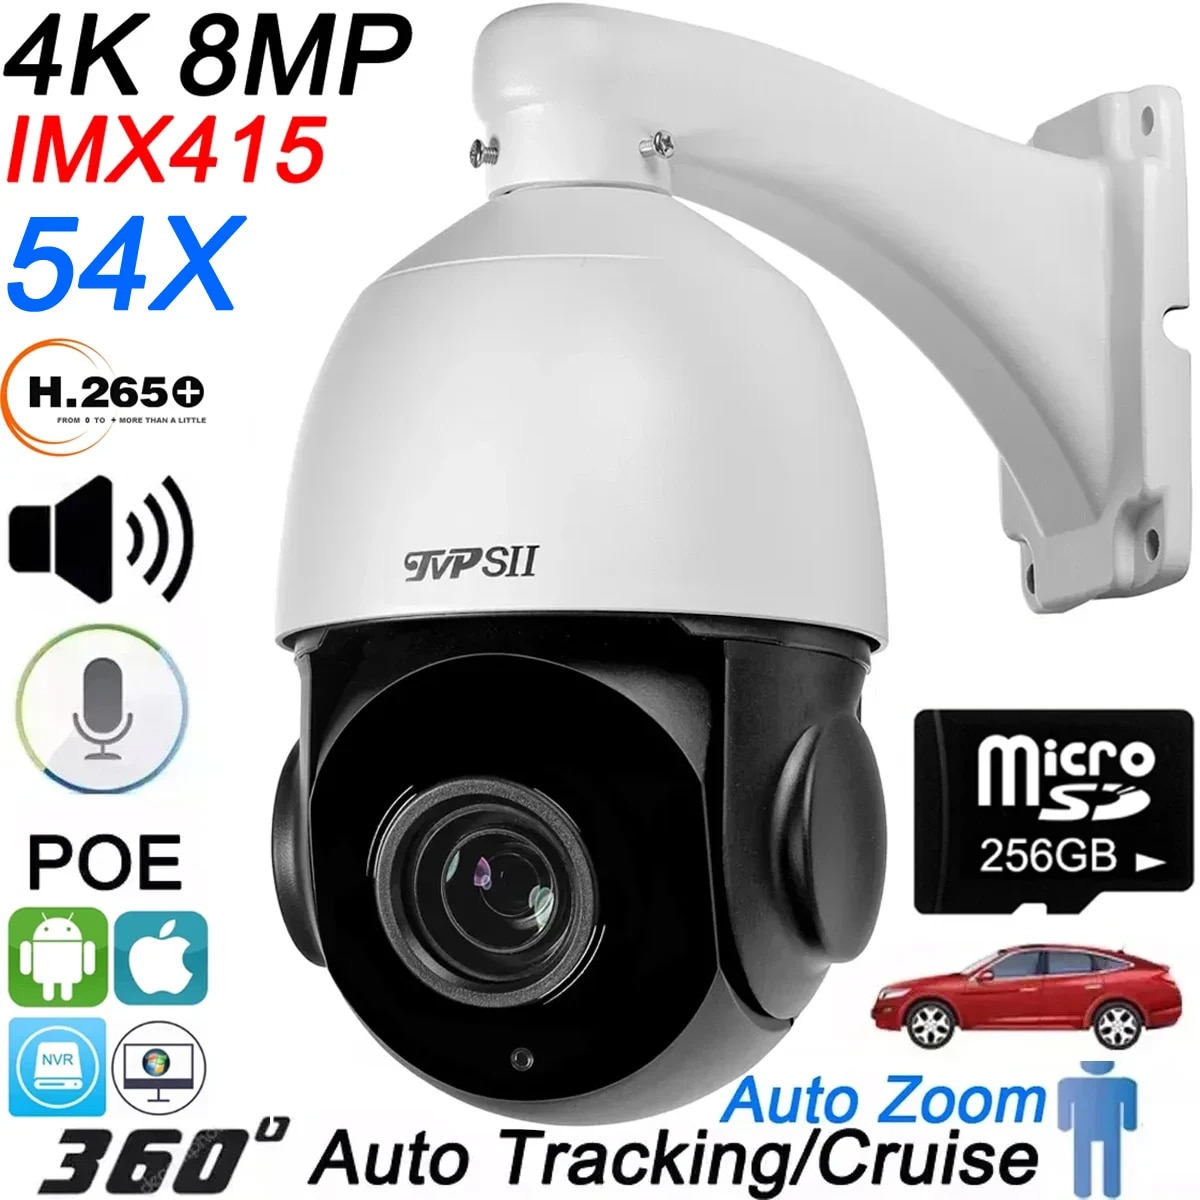 Auto Tracking 8MP Surveillance Camera  Comprehensive Security with PTZ and 360